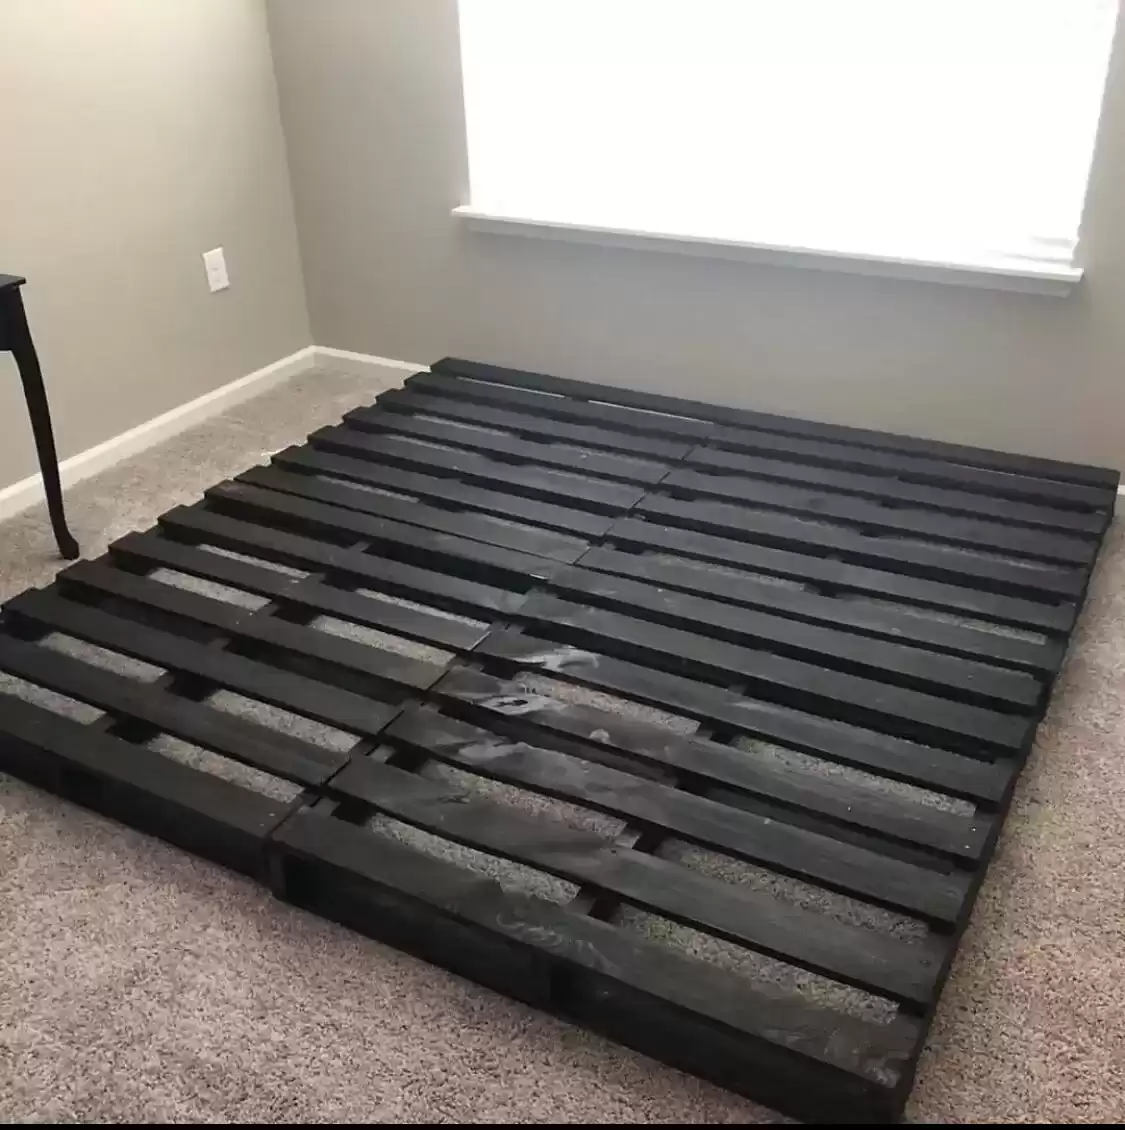 Pallet Bed for Sale!-pic_1